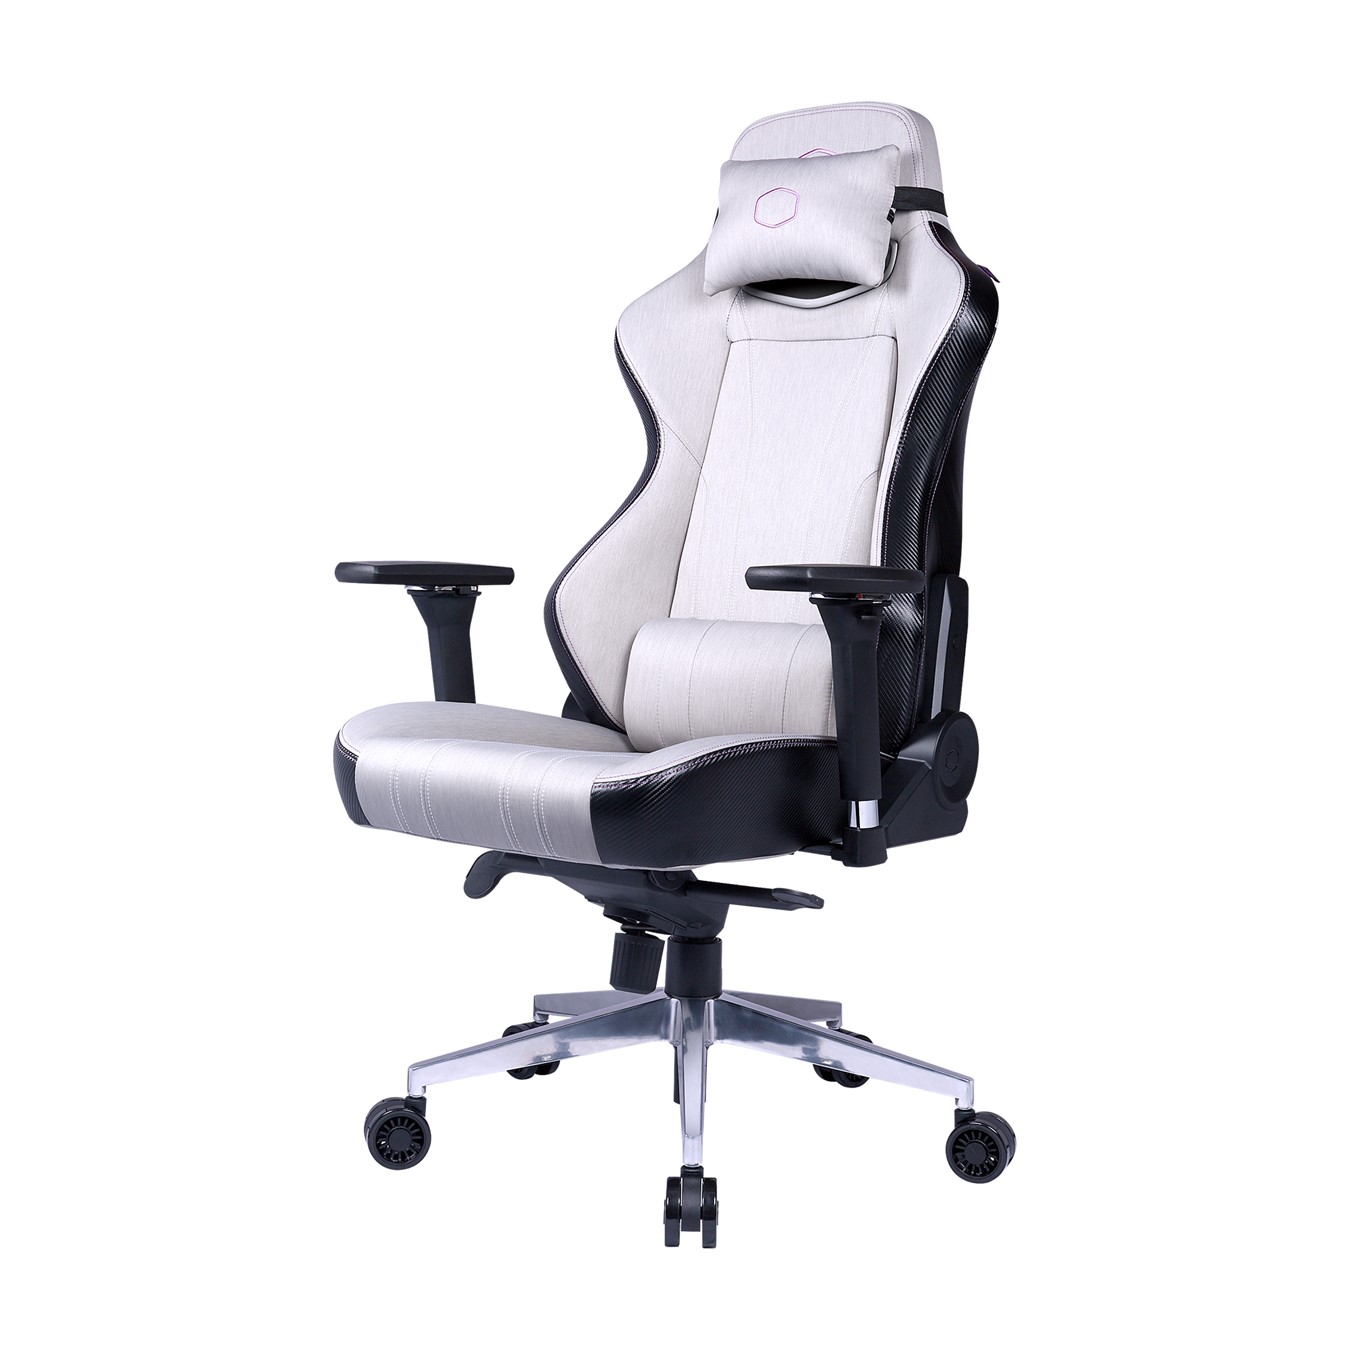 Caliber X1C Gaming Chair - 45 degree angle view